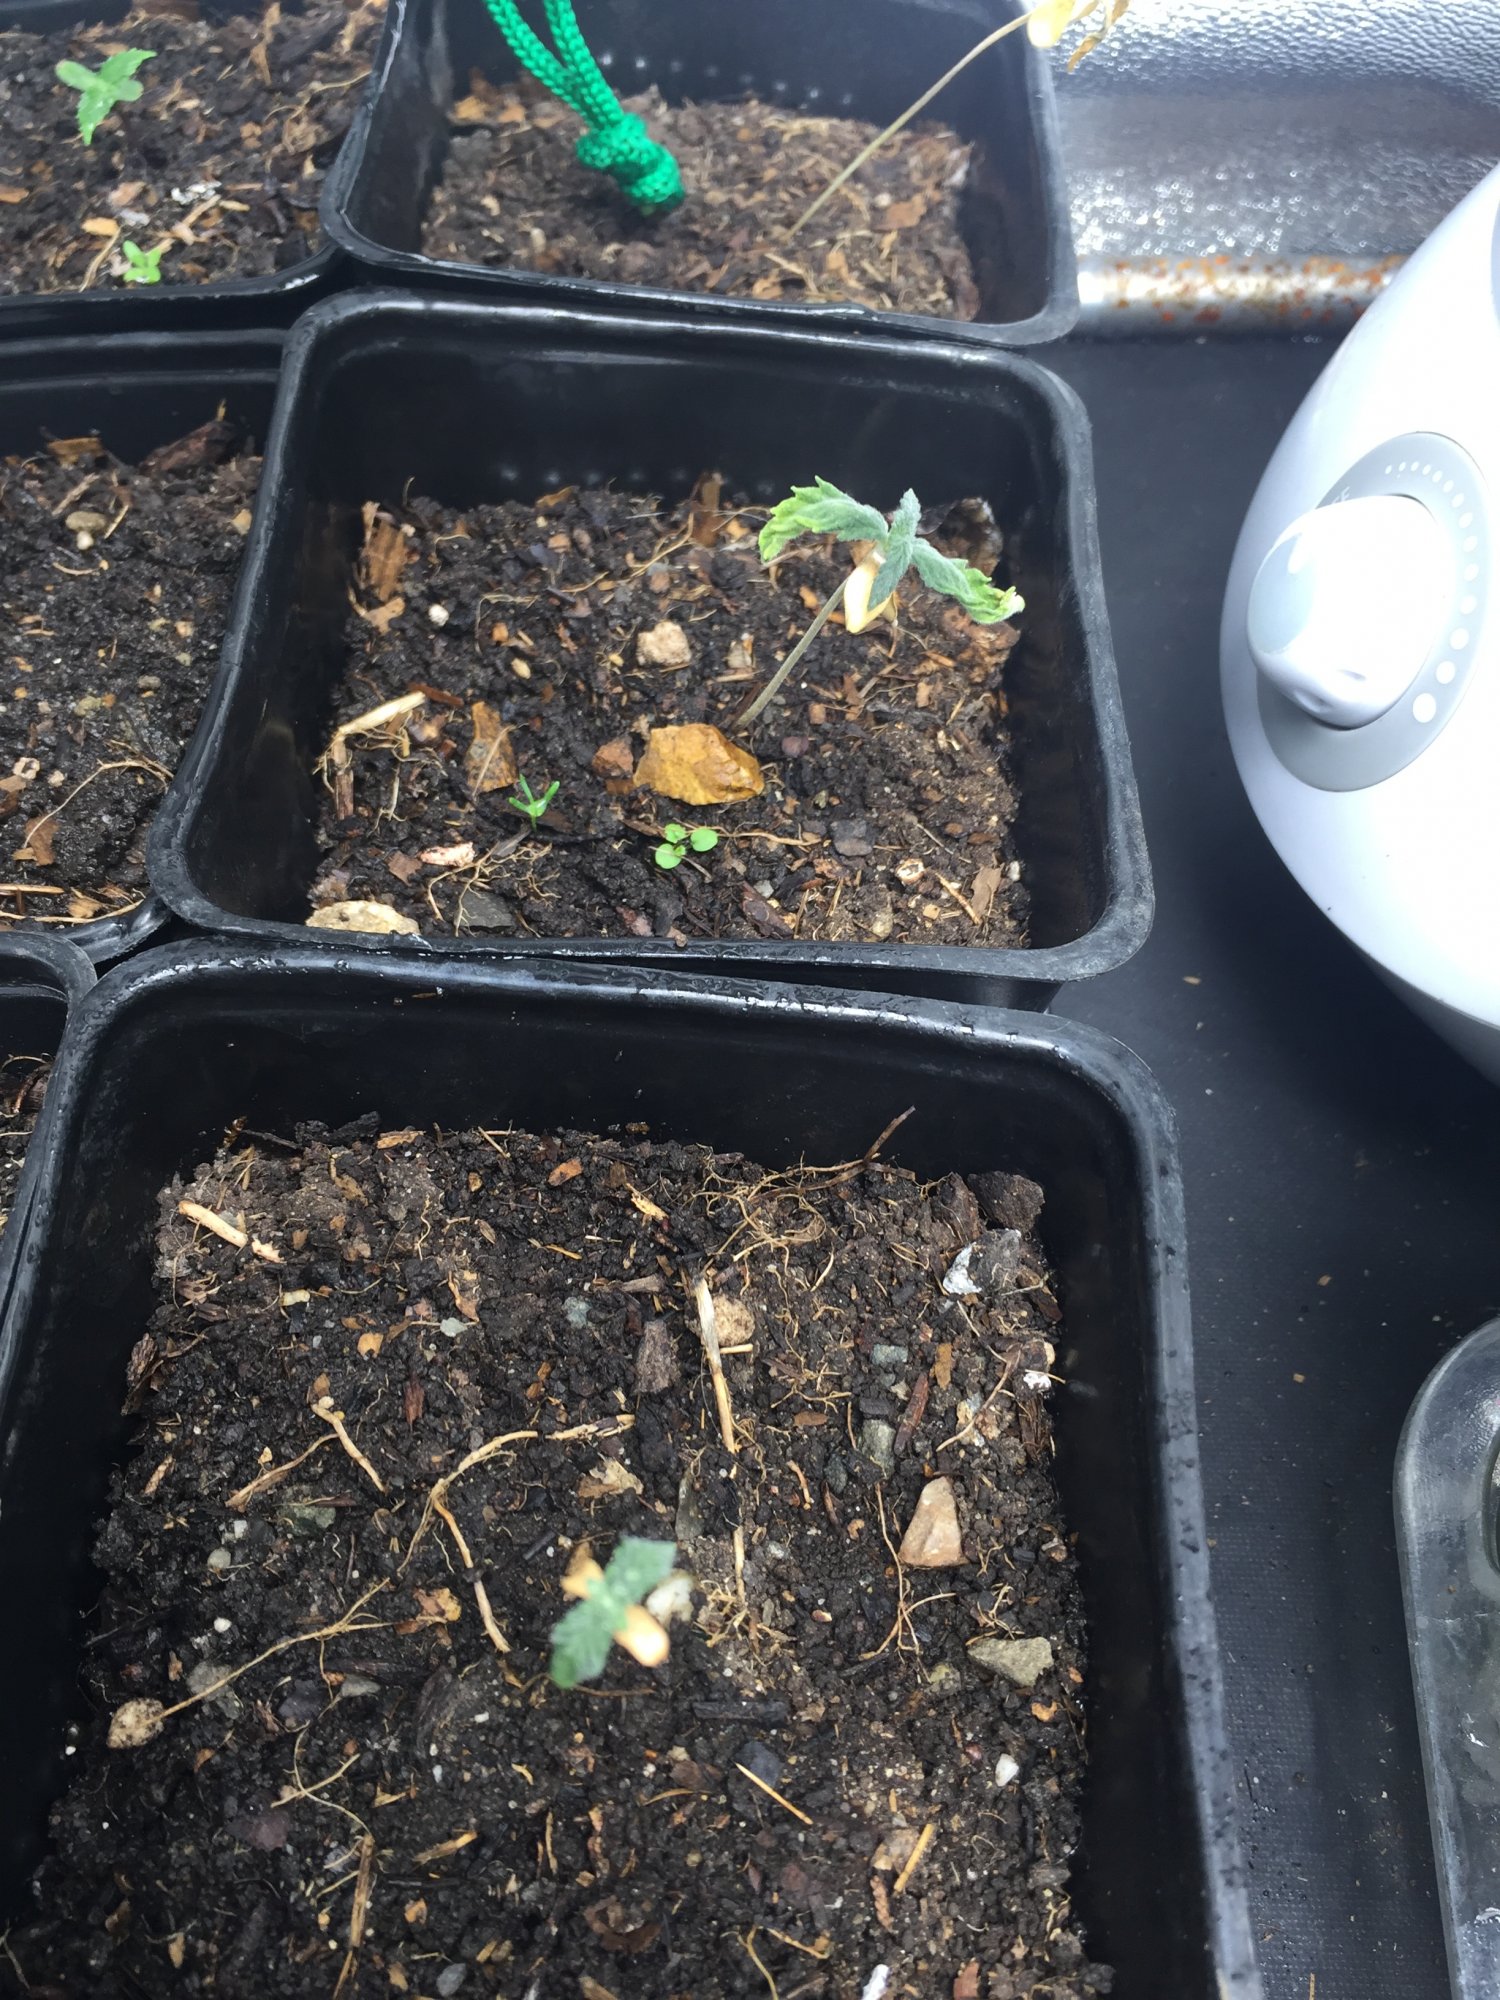 Some seedlings yellowing and or drooping 2